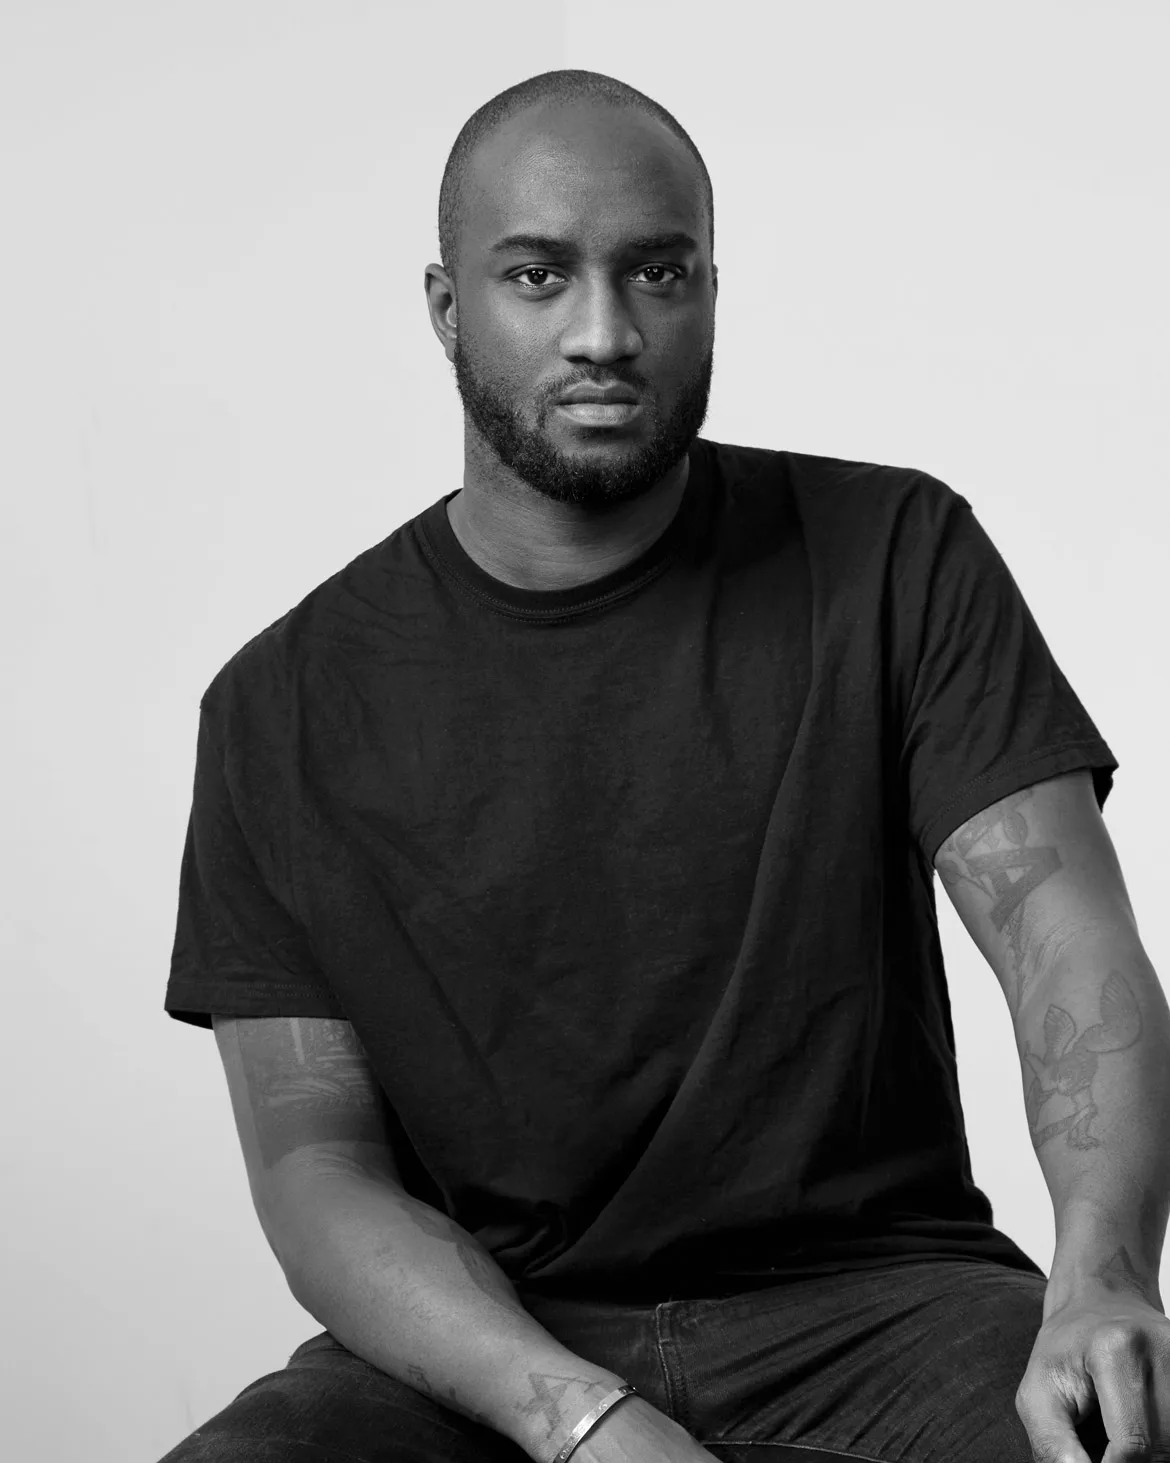 Virgil Abloh's Architecture and Design Legacy is on Display at the